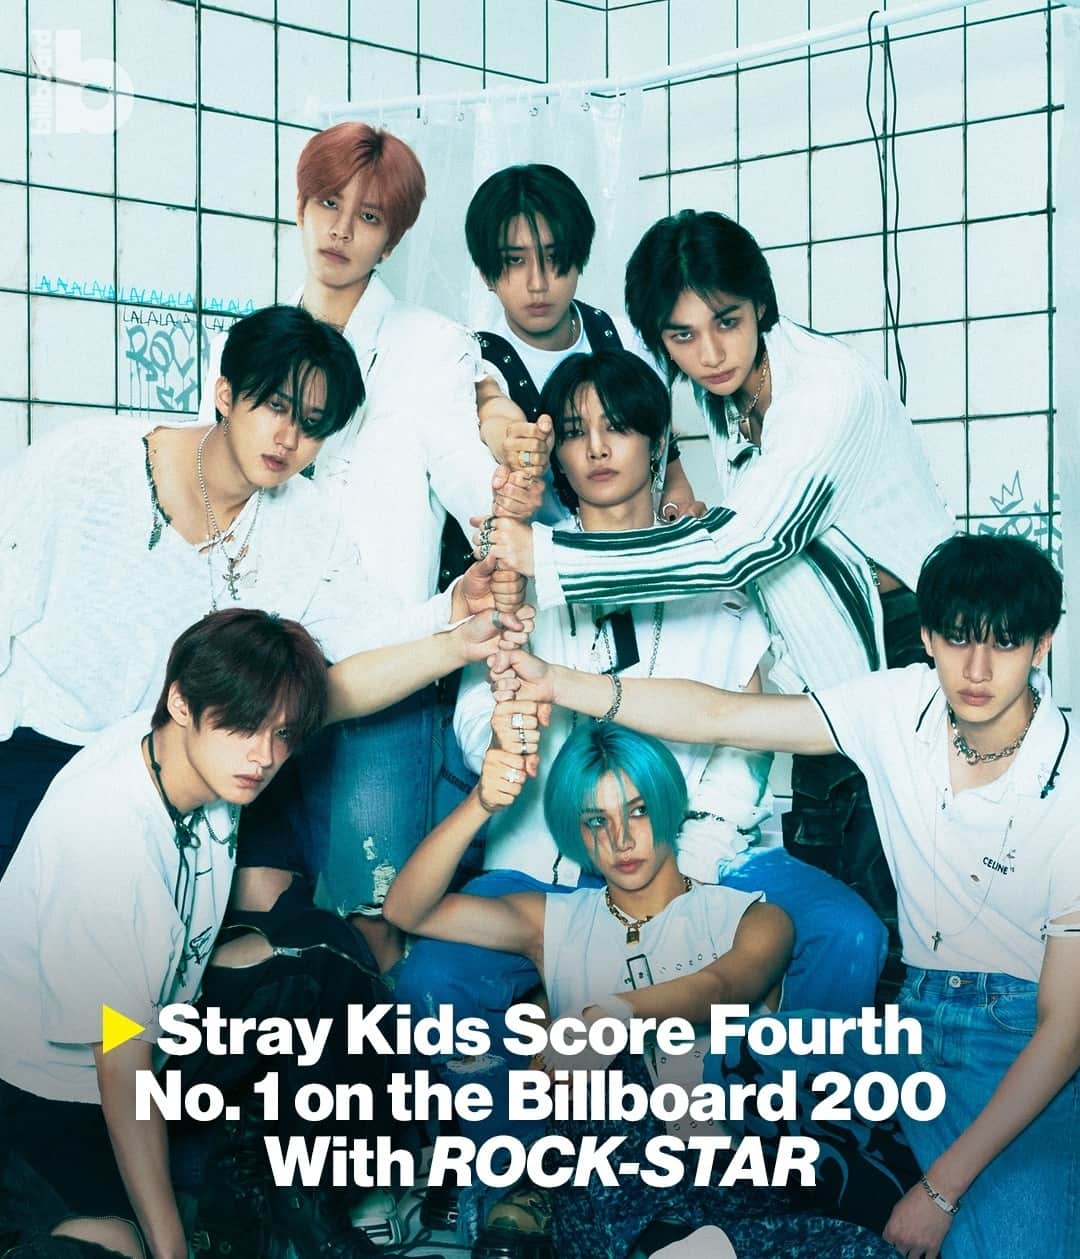 Billboardのインスタグラム：「Stray Kids’ 'ROCK-STAR' debuts at No. 1 on the #Billboard200, earning the group its fourth chart-topper. 📈⁠ ⁠ All four of Stray Kids’ chart entries have debuted at No. 1 on the Billboard 200, making them the first act to see their first four chart entries debut at No. 1 since Alicia Keys in 2001-07.⁠ ⁠ Get more details at the link in bio + stay tuned for their #BBMAs performance tonight!」